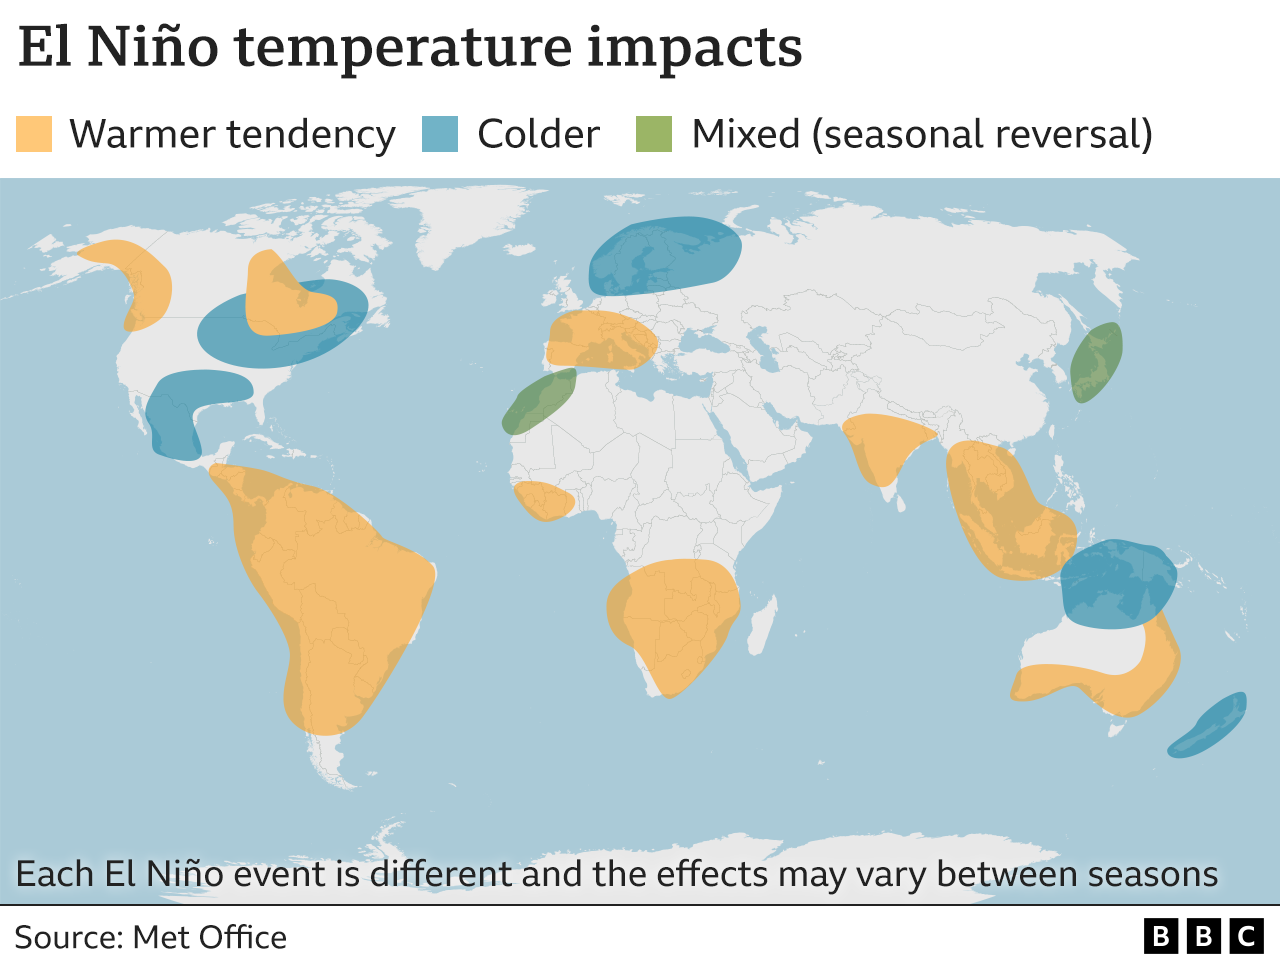 Typical effects of El Nino events on temperature patterns for each region. Key trends include warming in South America, southeast Asia and southern Africa. Cooling in parts of North America. [June 2023]